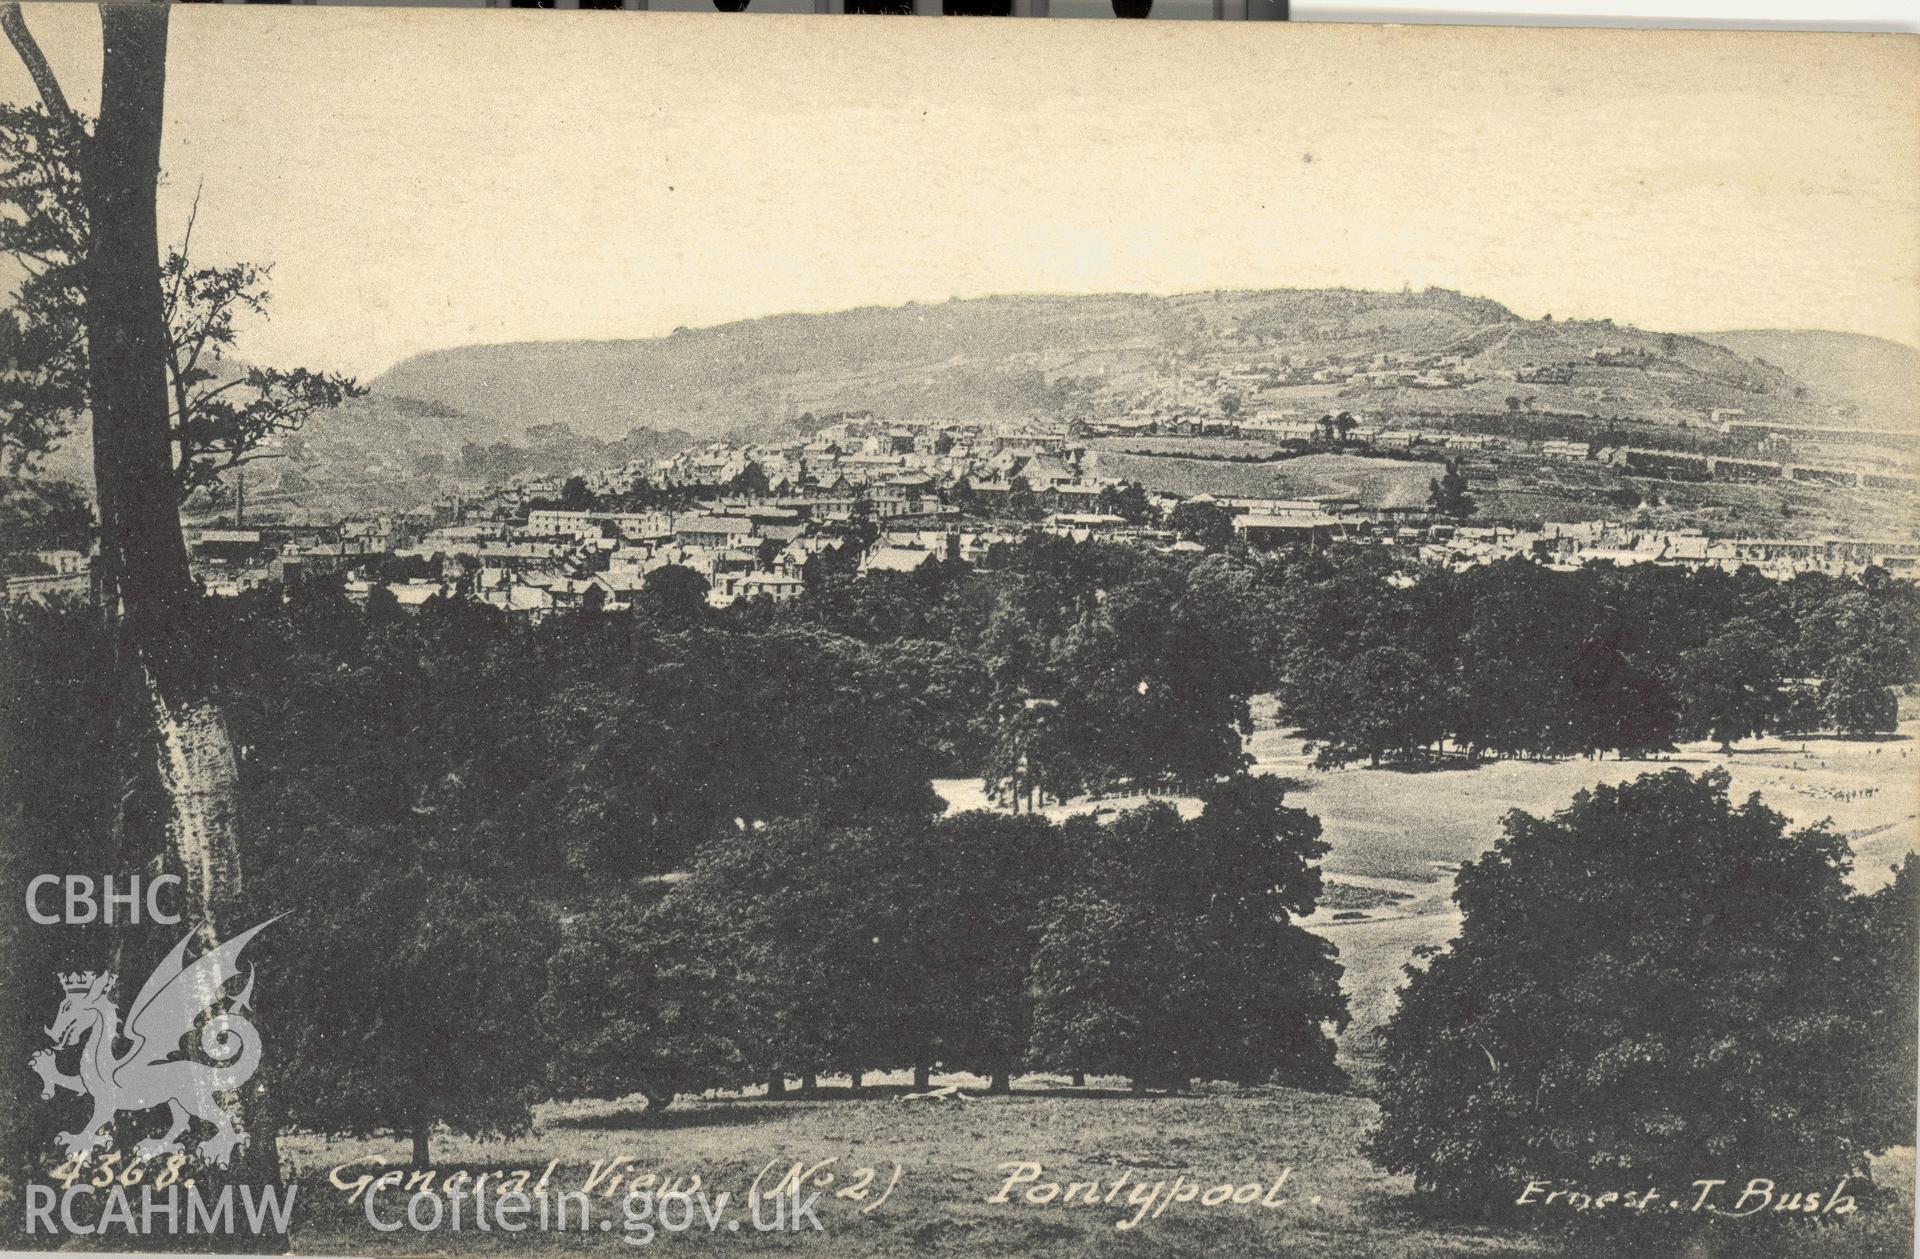 Digitised postcard image of Pontypool town from the park, Ernest T Bush. Produced by Parks and Gardens Data Services, from an original item in the Peter Davis Collection at Parks and Gardens UK. We hold only web-resolution images of this collection, suitable for viewing on screen and for research purposes only. We do not hold the original images, or publication quality scans.